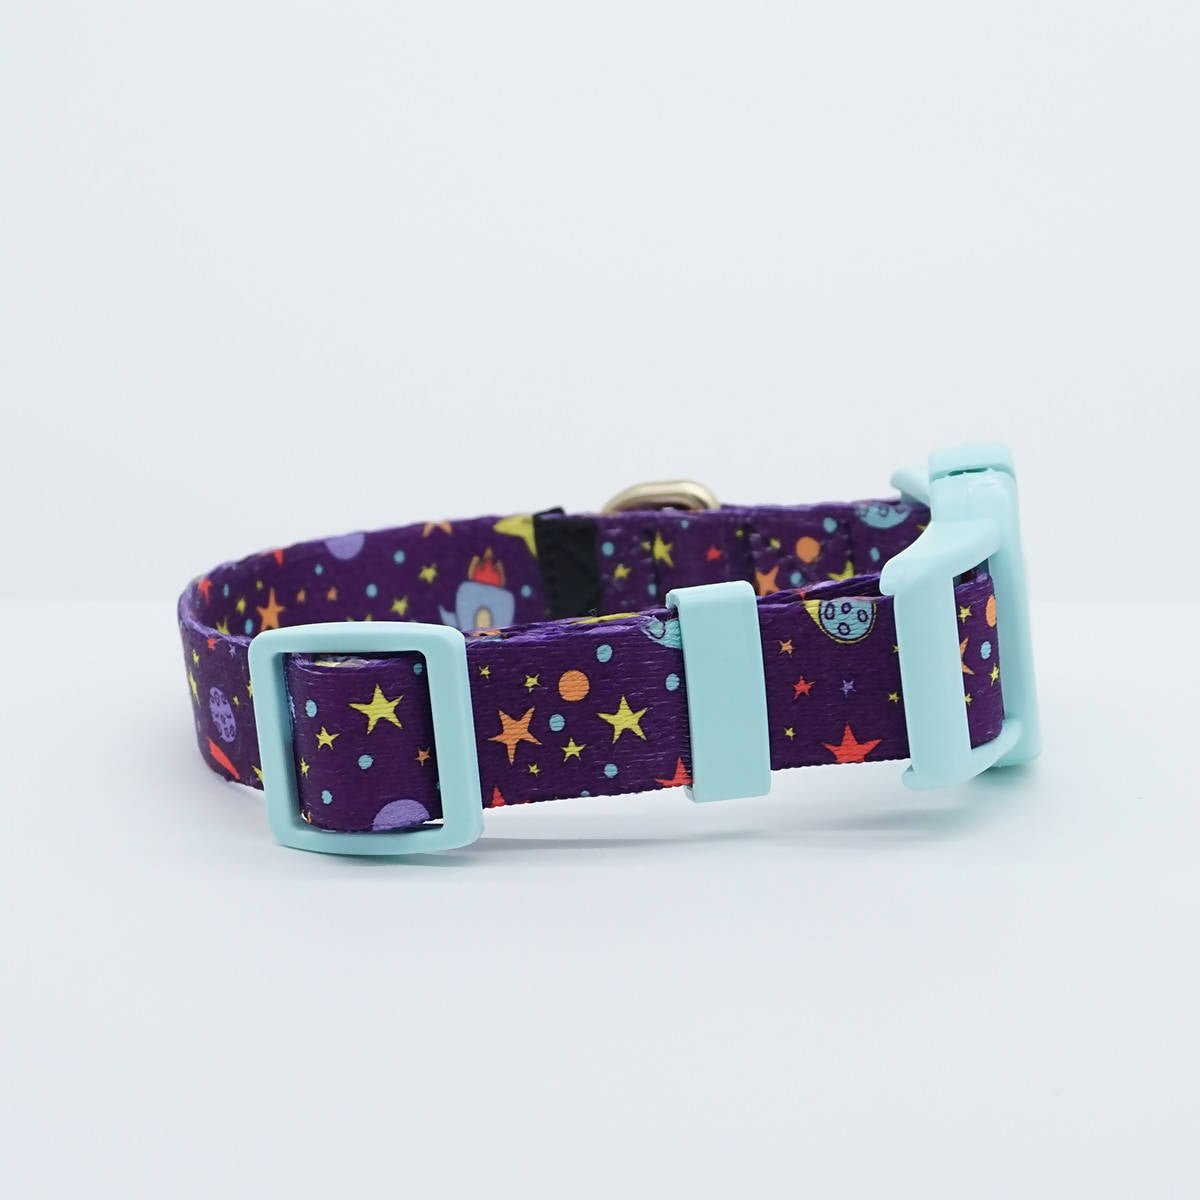 Vibrant collection of dog collars available in our online pet shop. Premium designer dog collar, now in stock at our online store. 